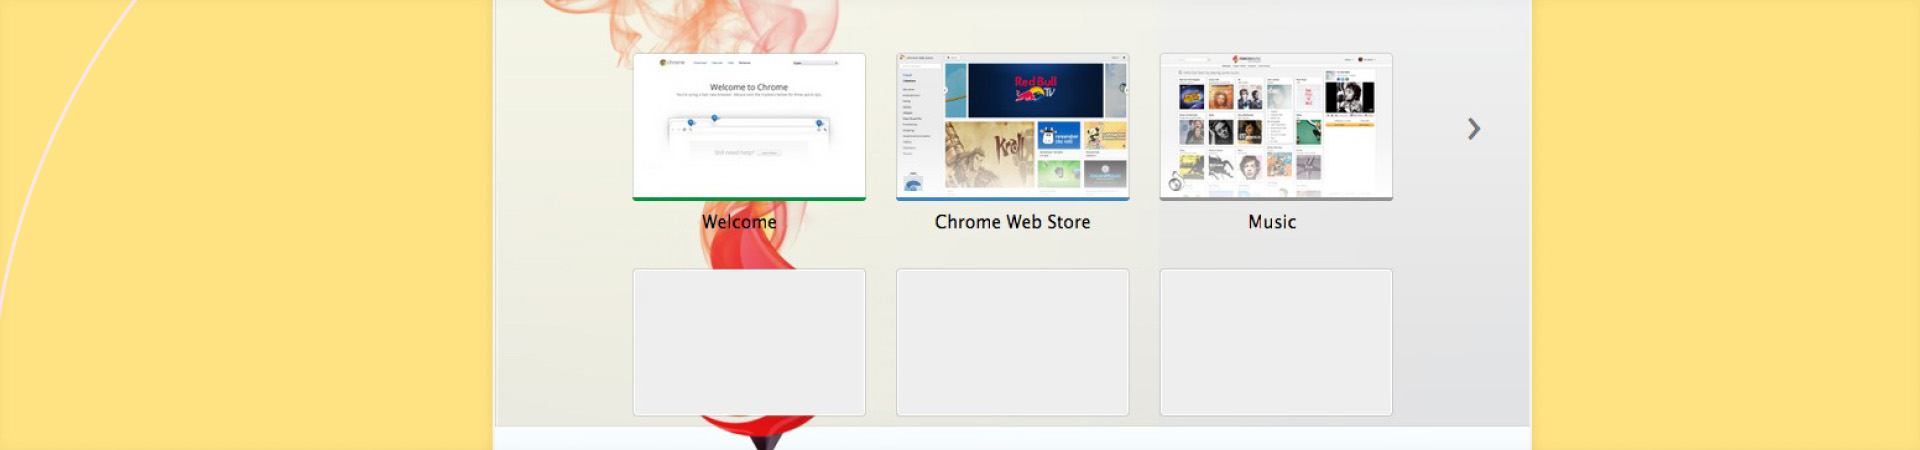 A Web Browser for Mac with 10M+ Users Monthly